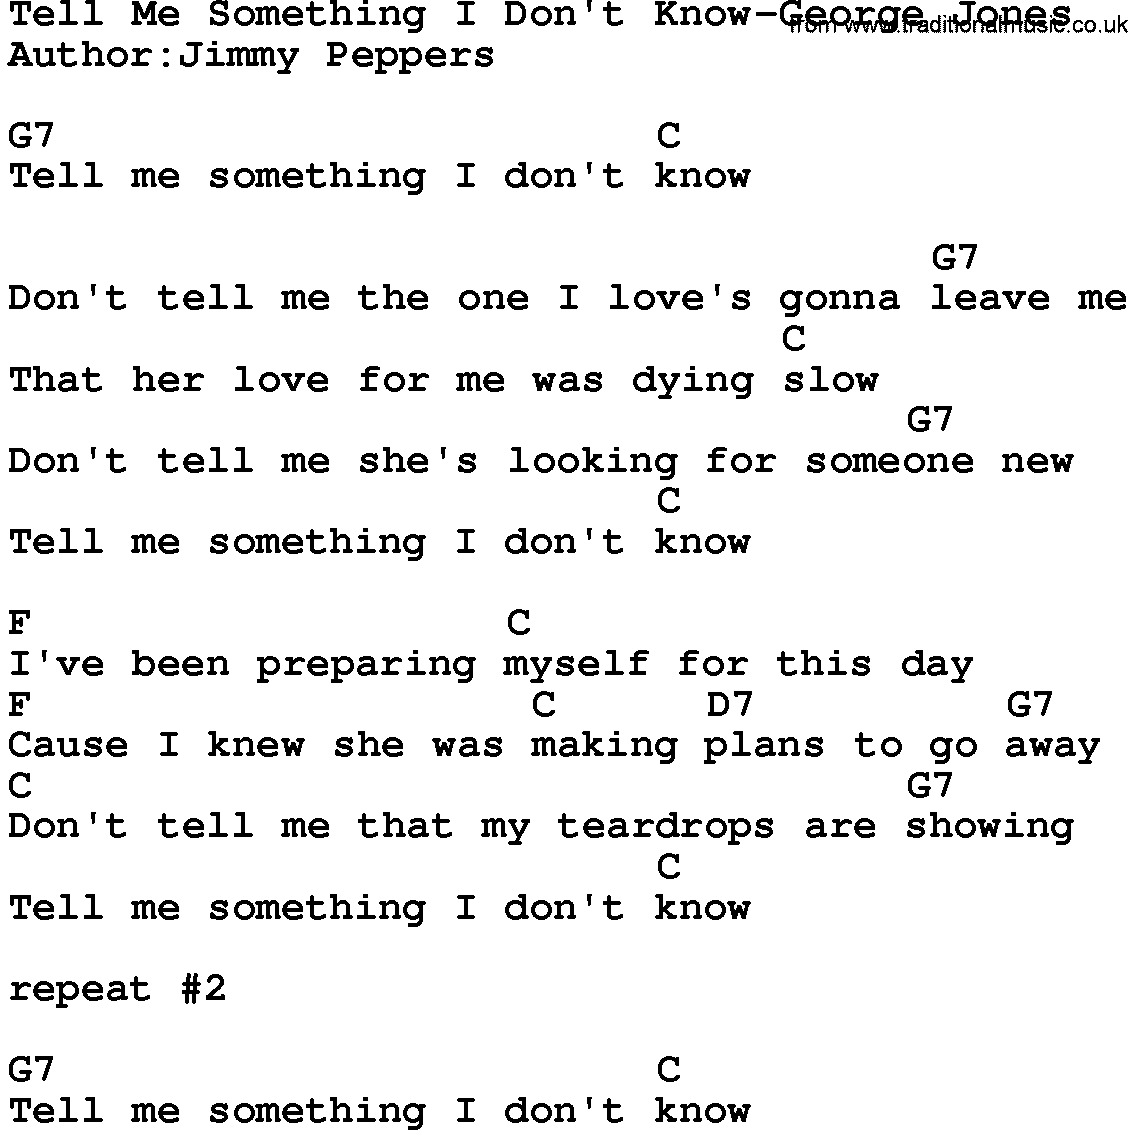 Country Music:Tell Me Something I Don't Know-George Jones Lyrics and Chords Tell Me What I Don't Know Lyrics